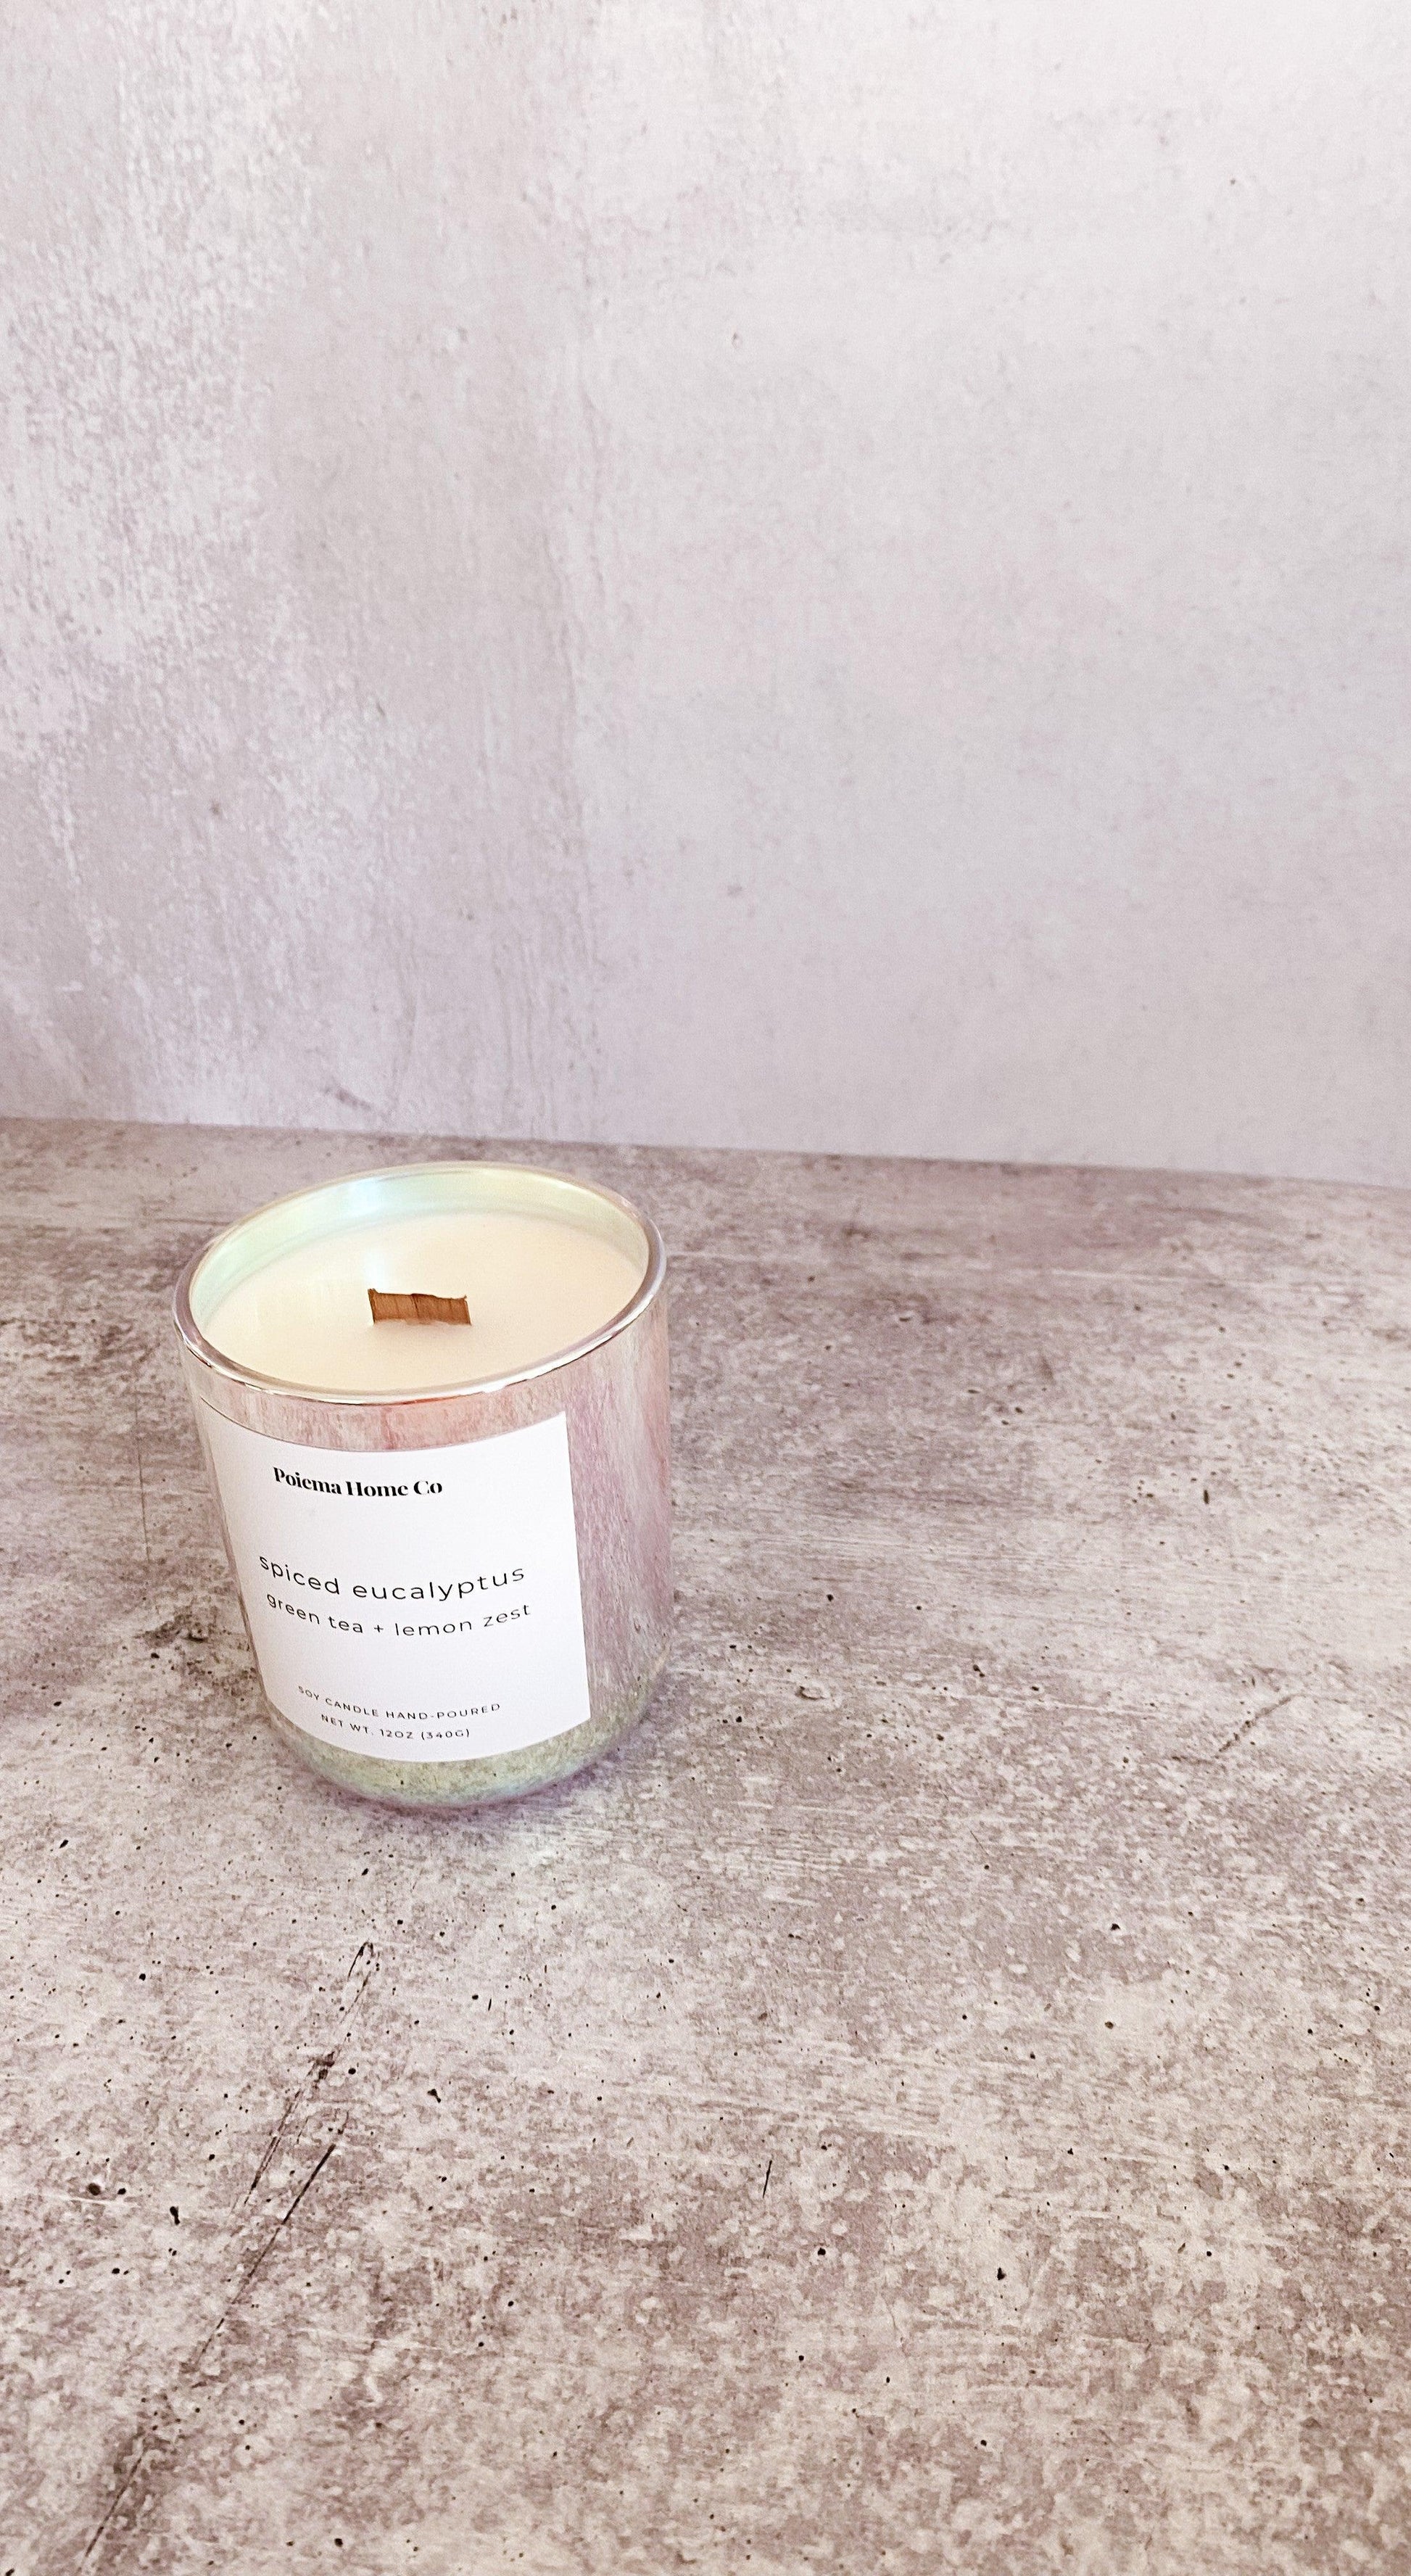 Luxury Hand-Poured Soy Wax Candles | spiced eucalyptus - Poiemahomeco